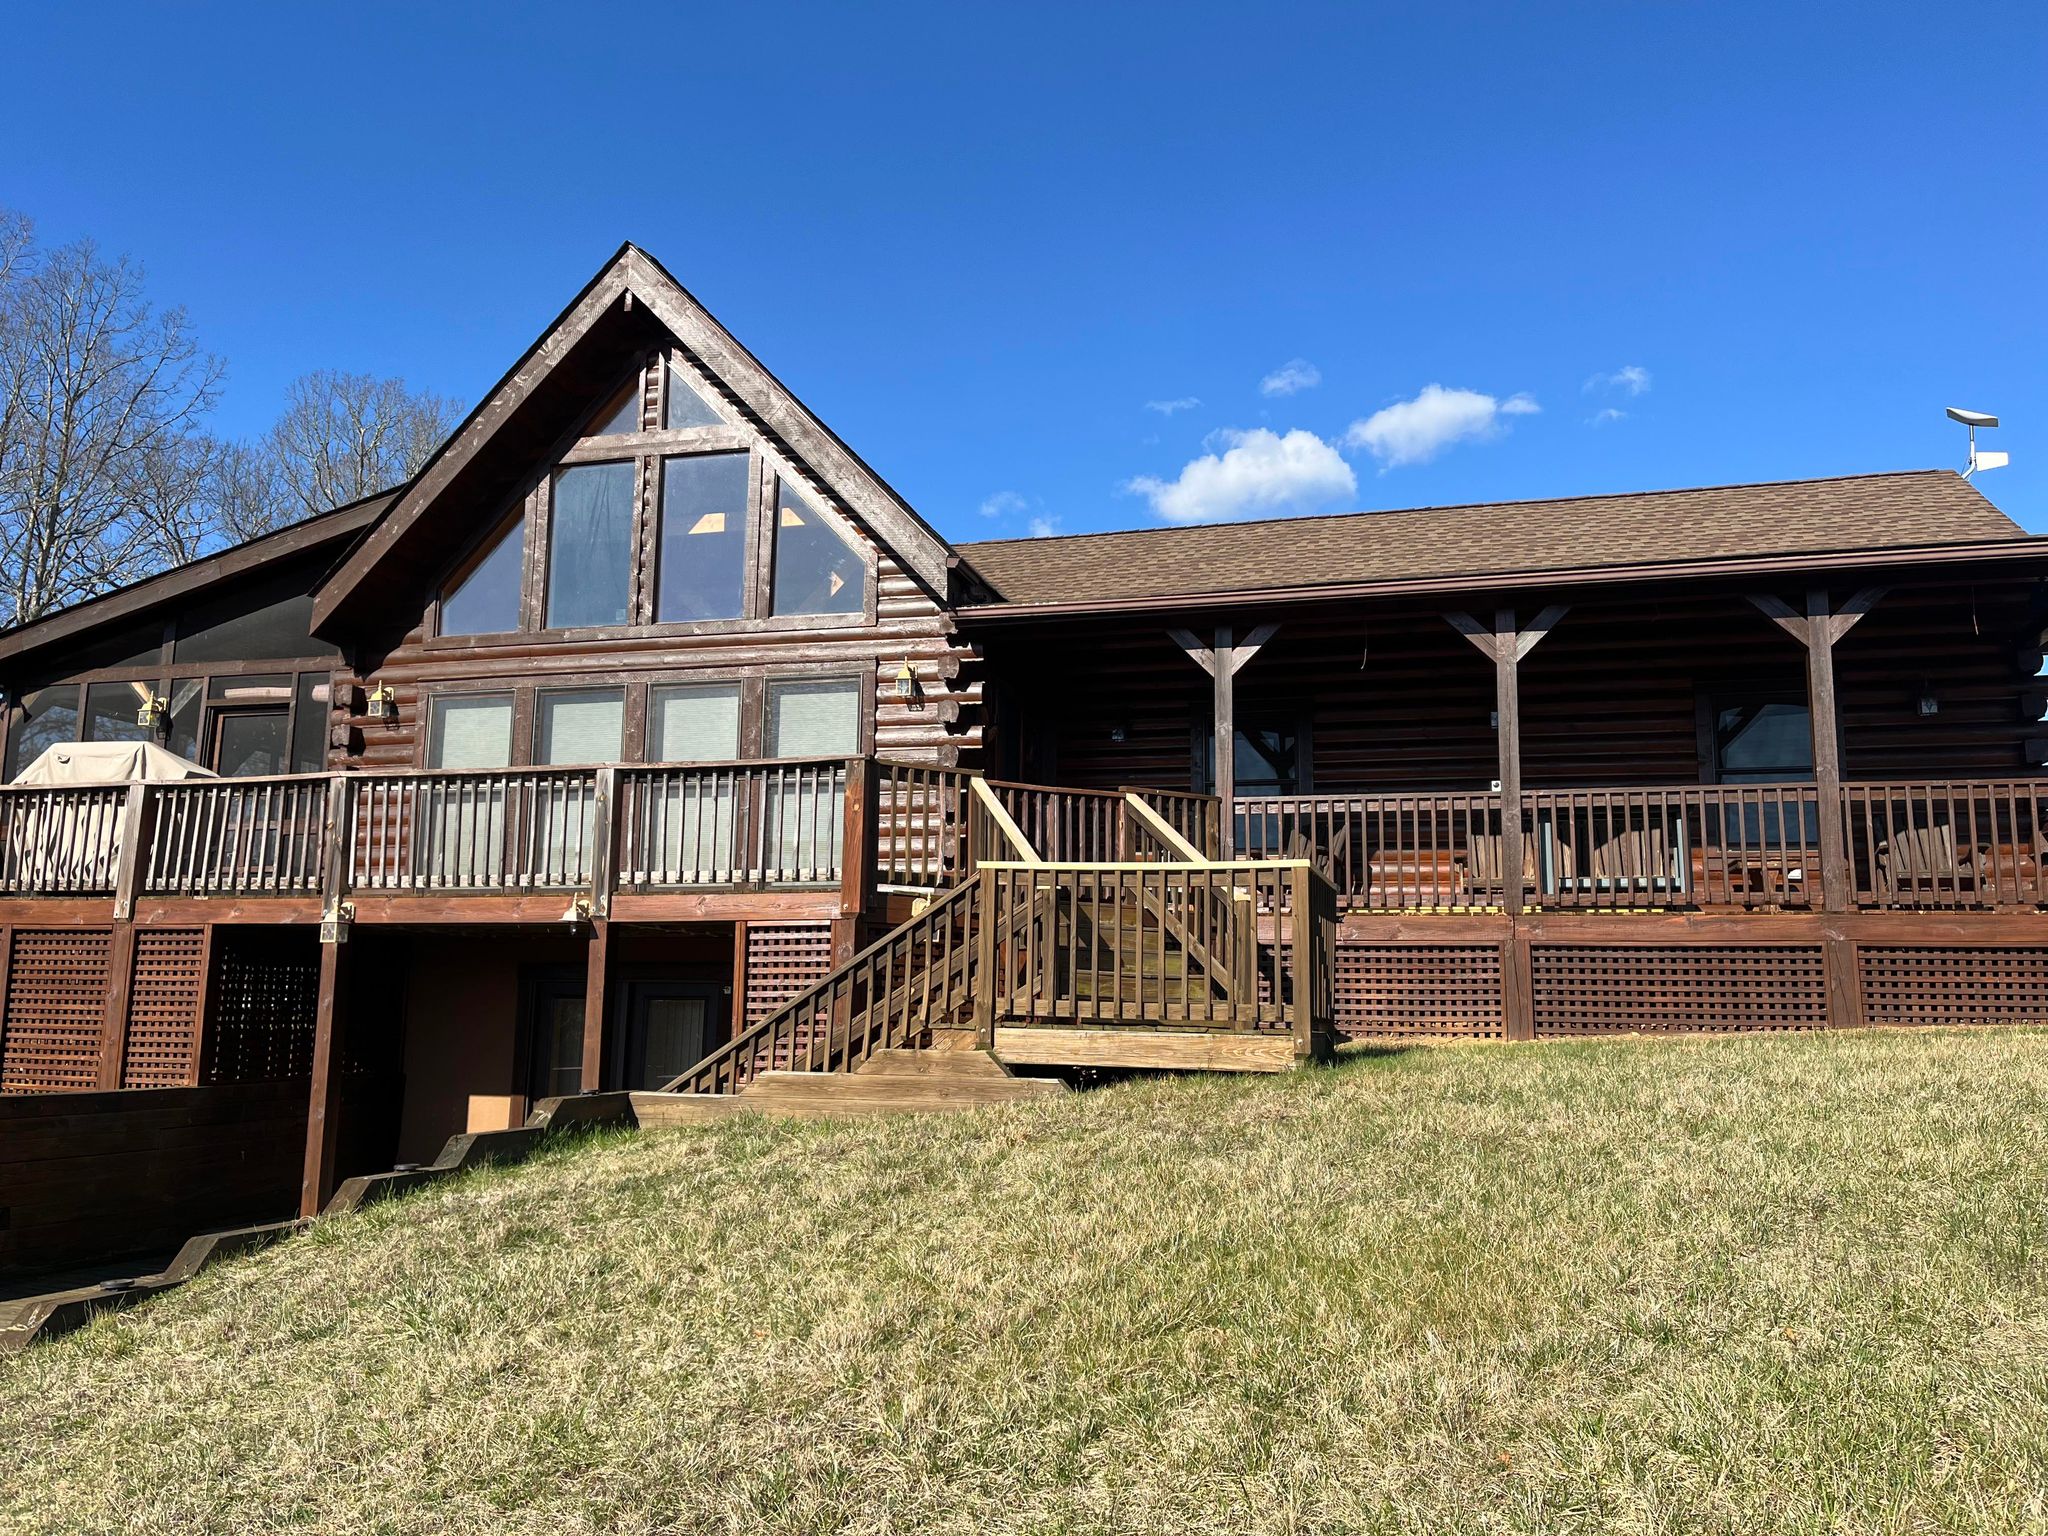 SOLD … 112 Sea Biscuit Drive, Points, WV 25437